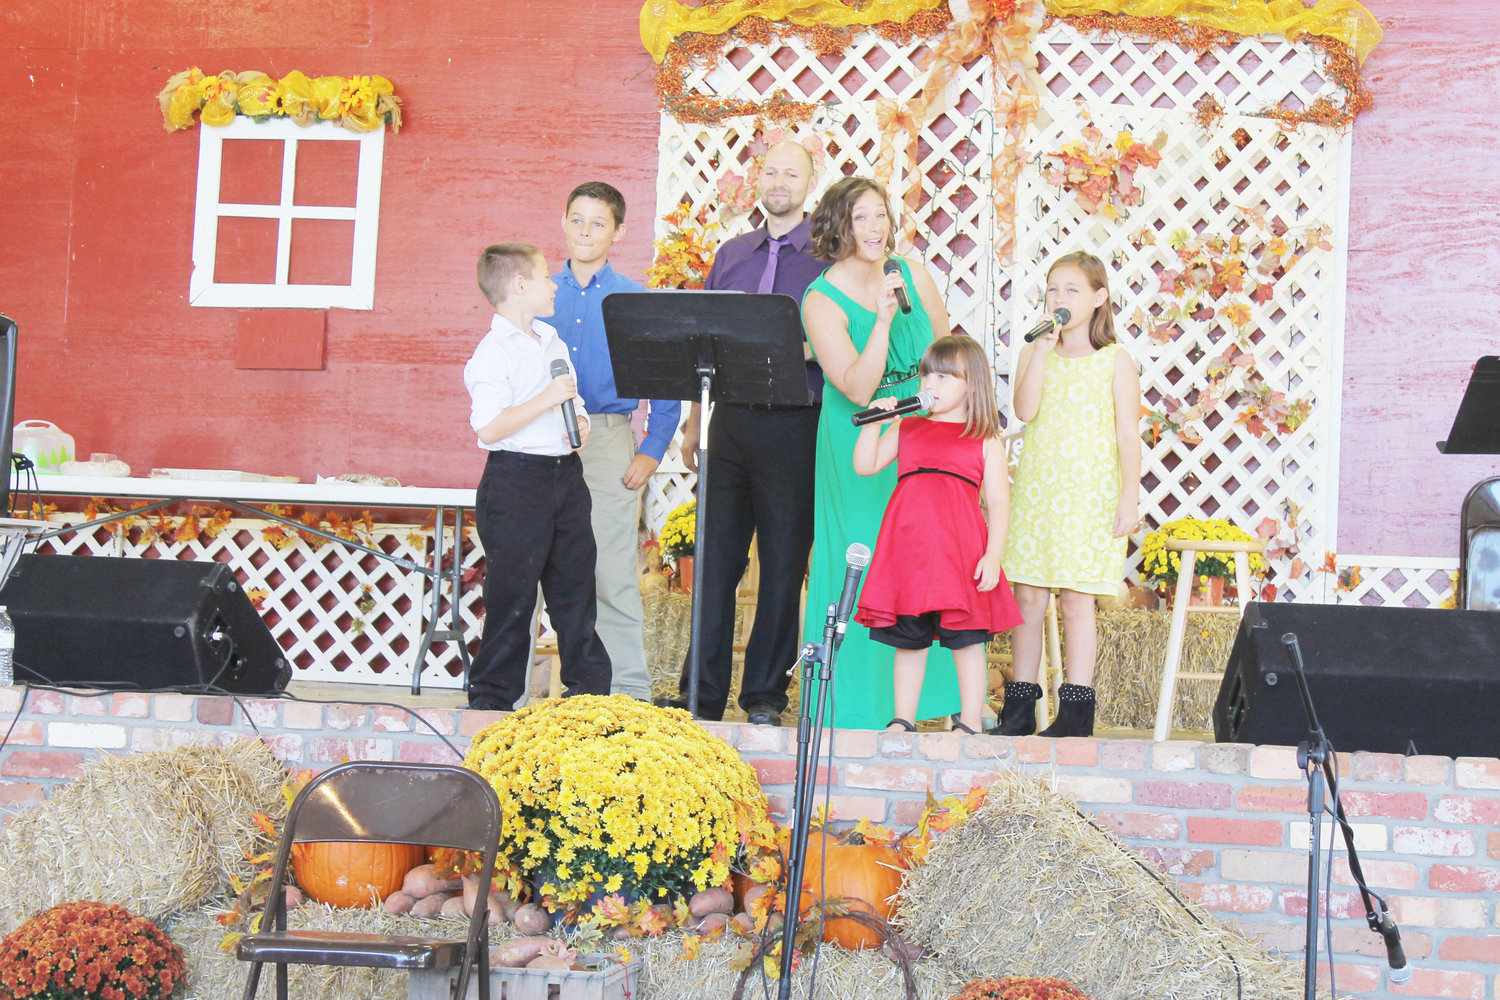 The Hodges family put on a harmonious and lively presentation of show tunes immediately after the stage was cleaned up from the Pie Eating Contest.